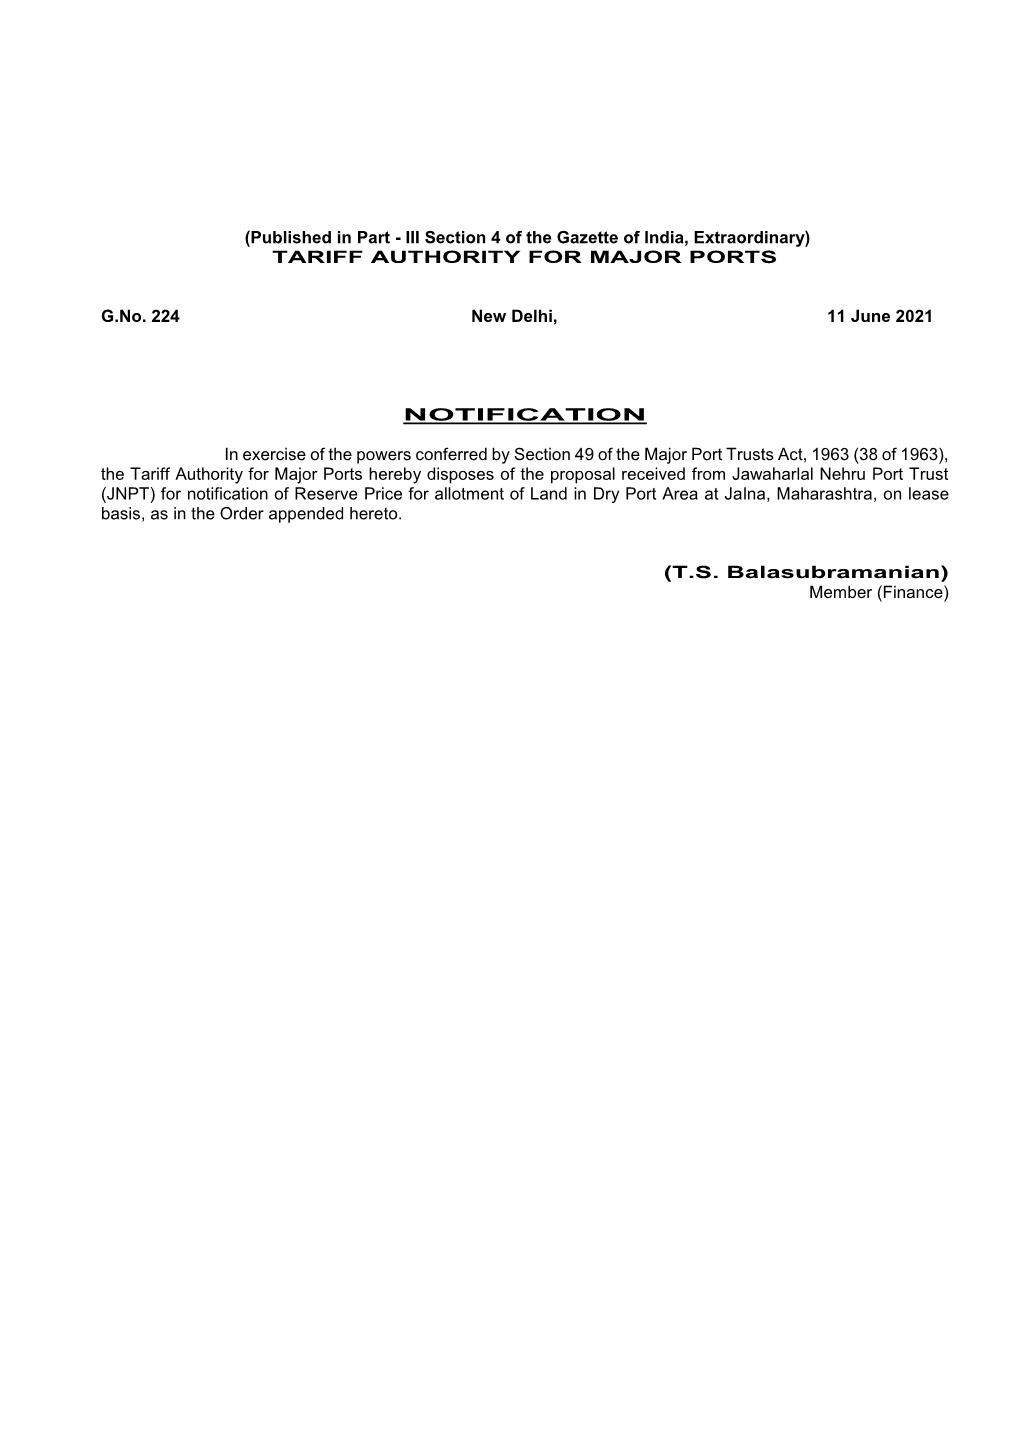 JNPT) for Notification of Reserve Price for Allotment of Land in Dry Port Area at Jalna, Maharashtra, on Lease Basis, As in the Order Appended Hereto